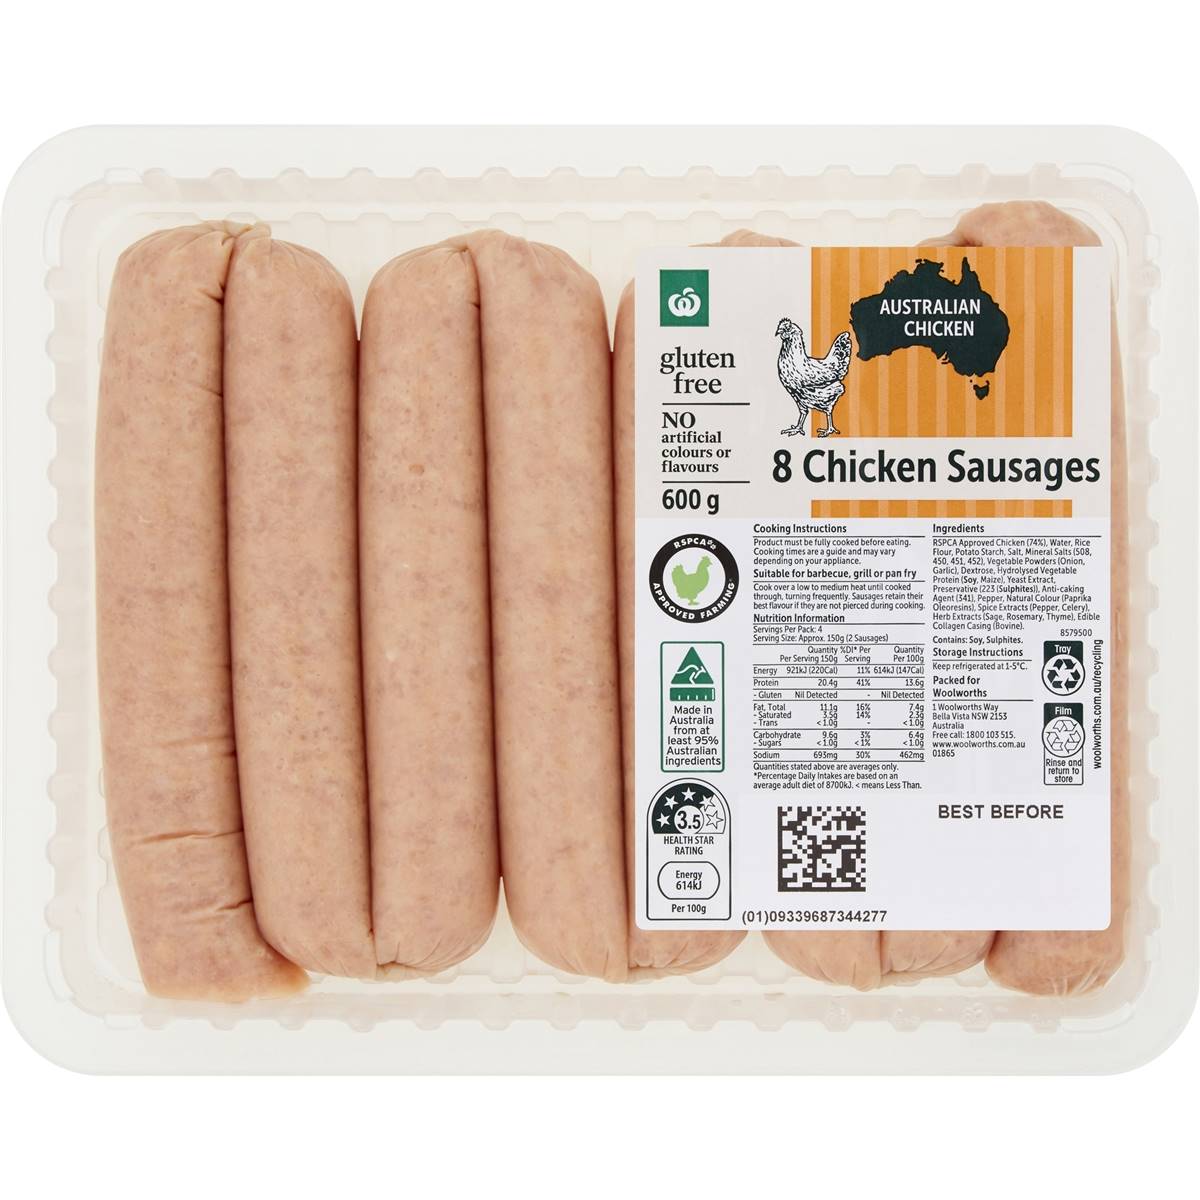 Calories in Woolworths 8 Chicken Sausages